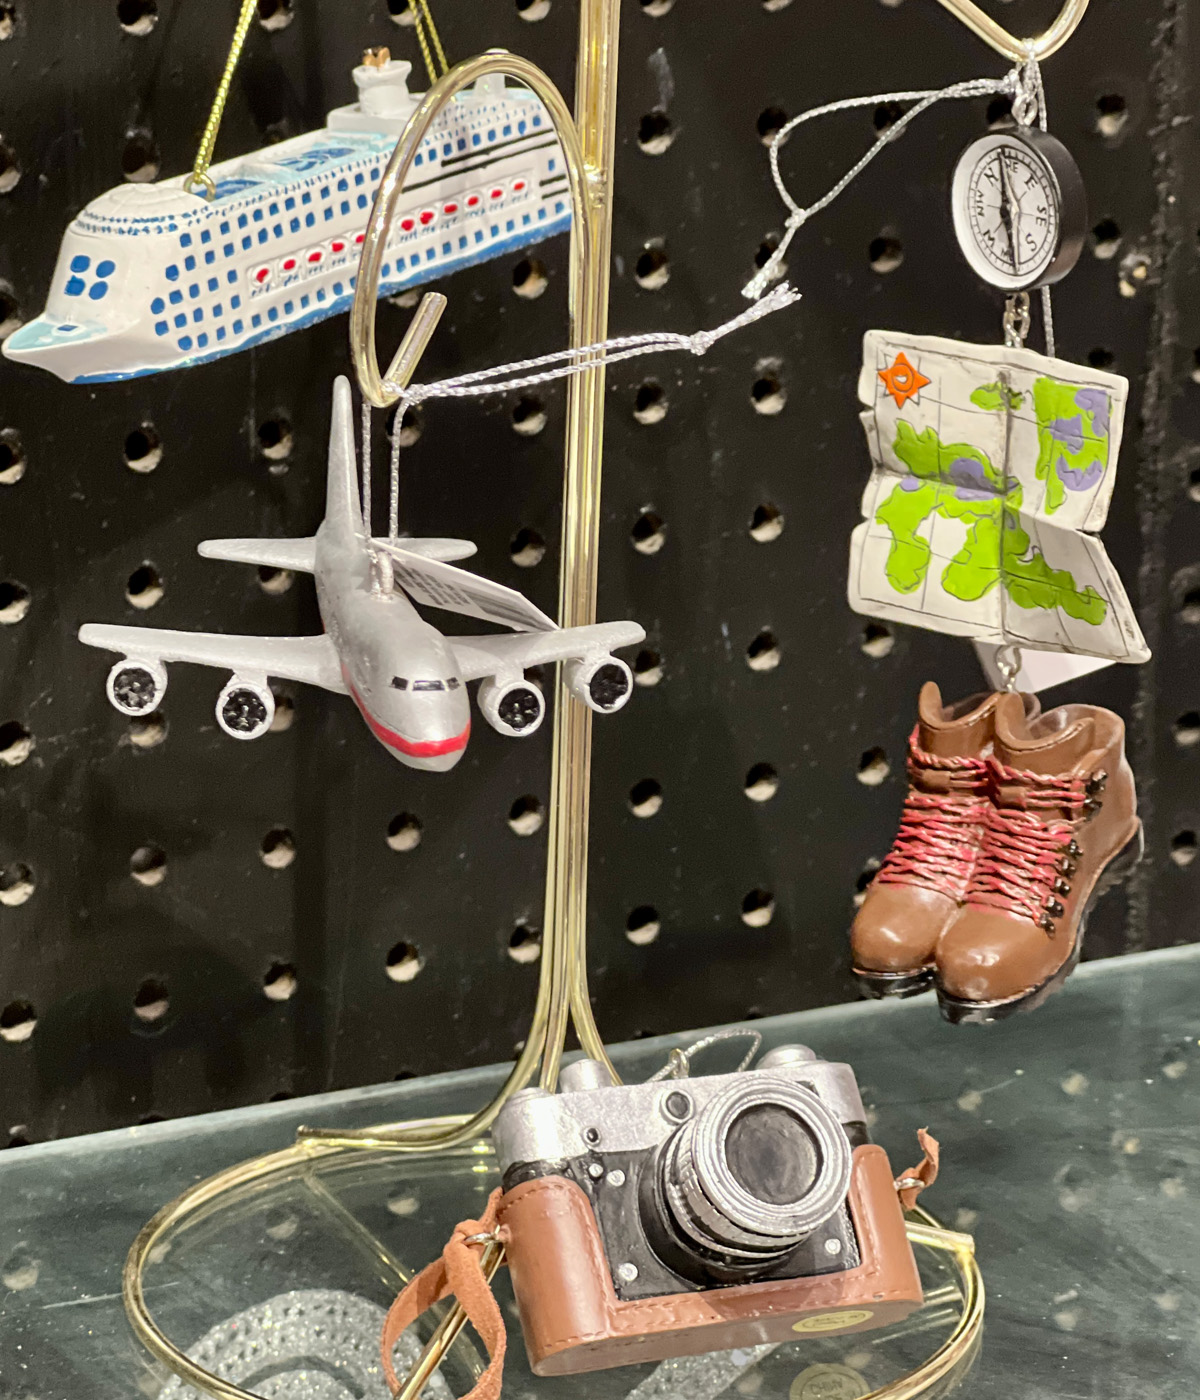 Air plane and ship ornament, Hiking shoes and camera